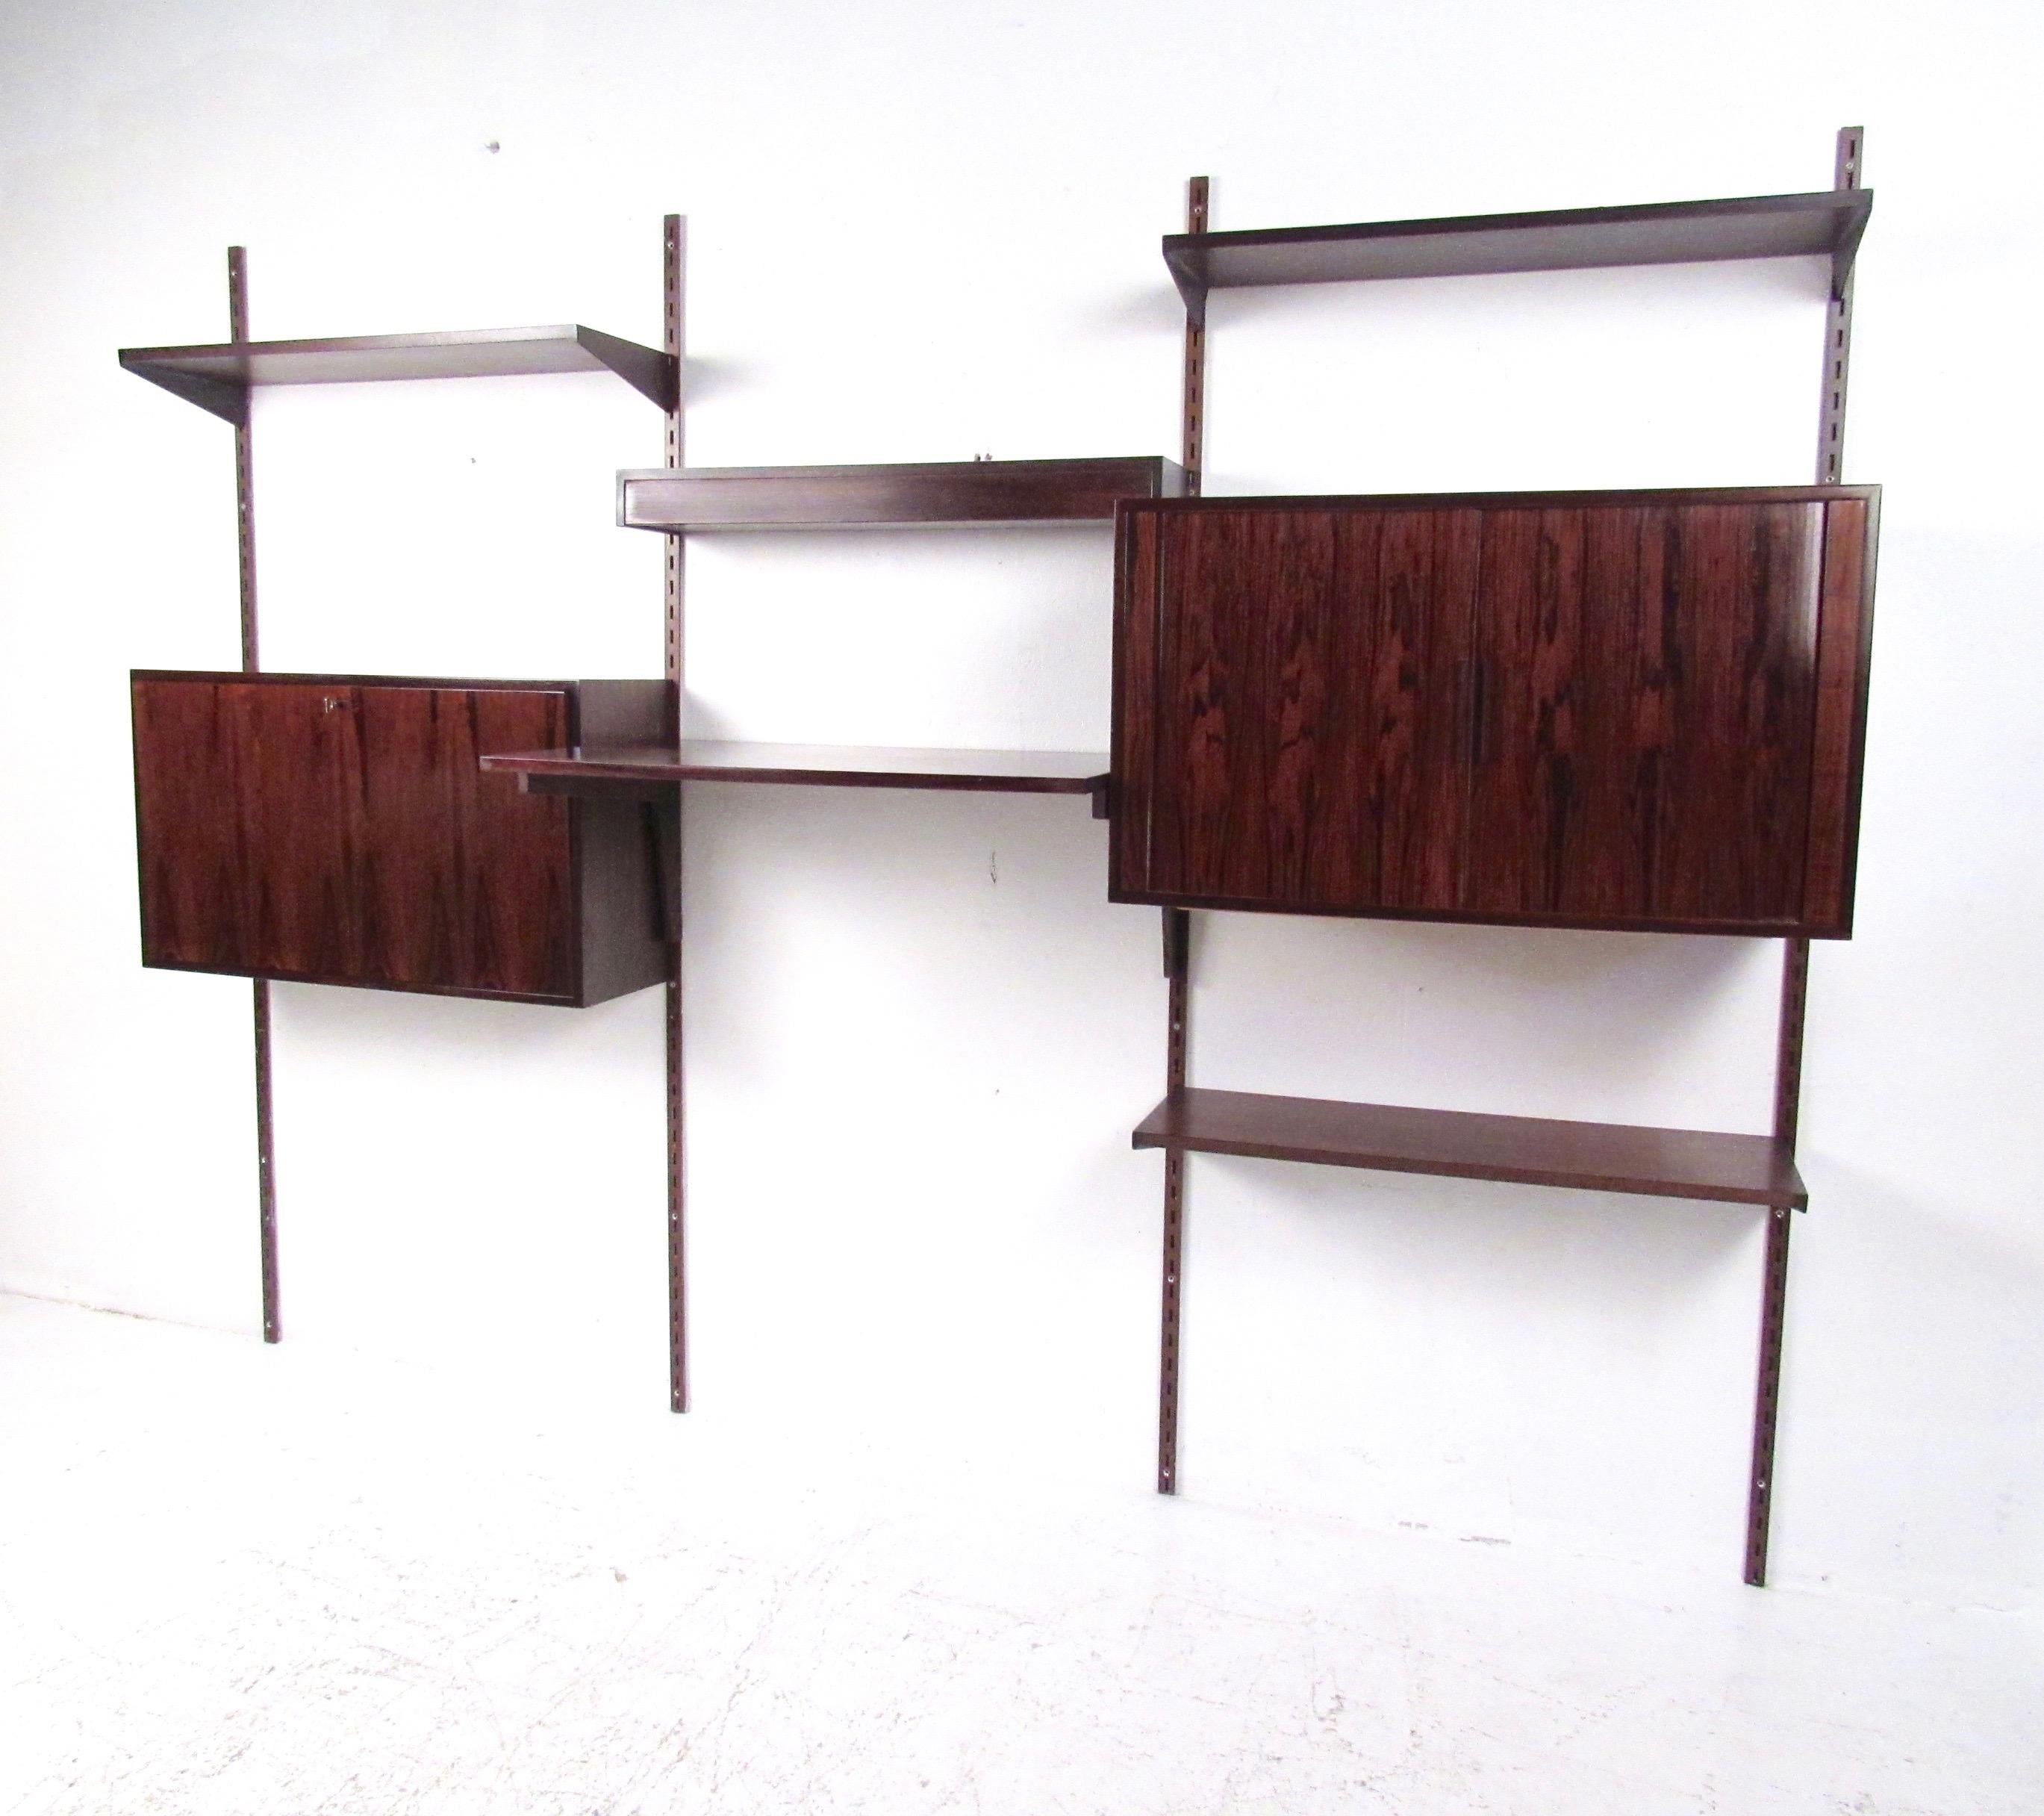 This striking vintage modern shelving unit features stunning rosewood construction with unique modular wall brackets. Scandinavian modern design in the style of Kai Kristiansen allows one to arrange the cabinets, shelves, and workspace to fit your